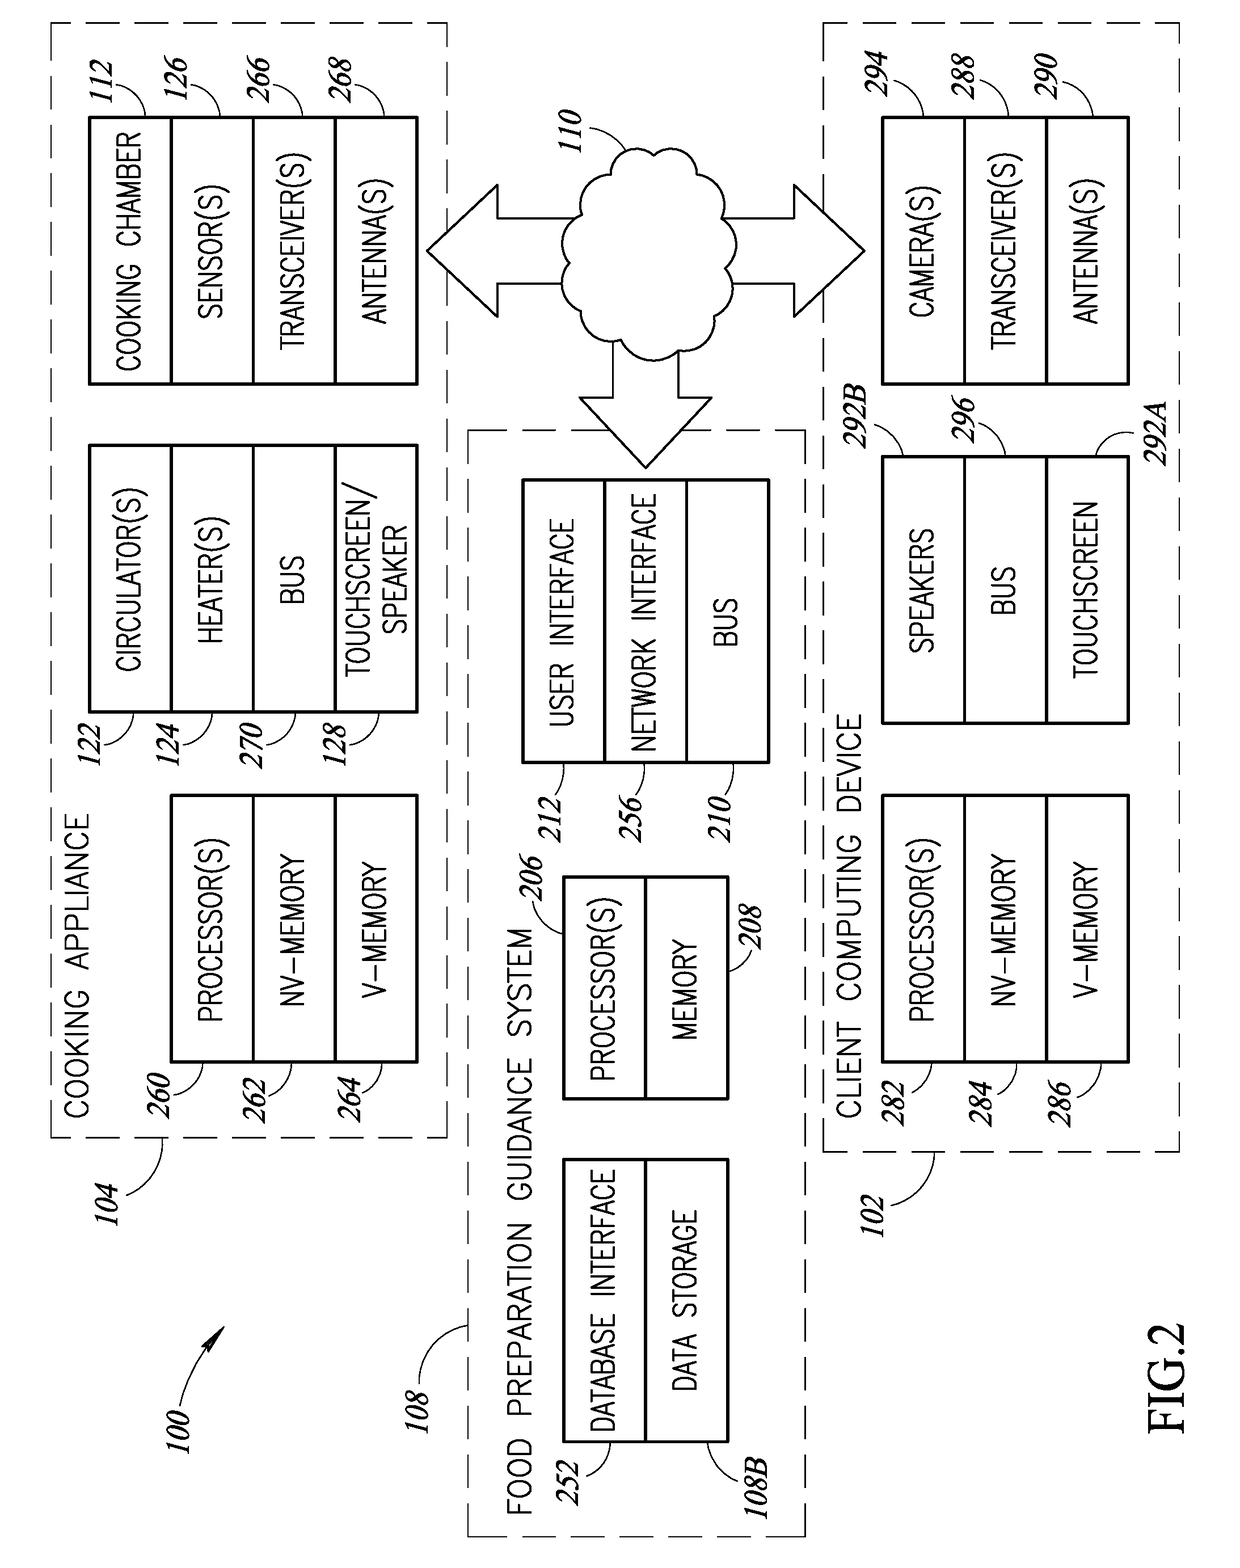 Data aggregation and personalization for remotely controlled cooking devices